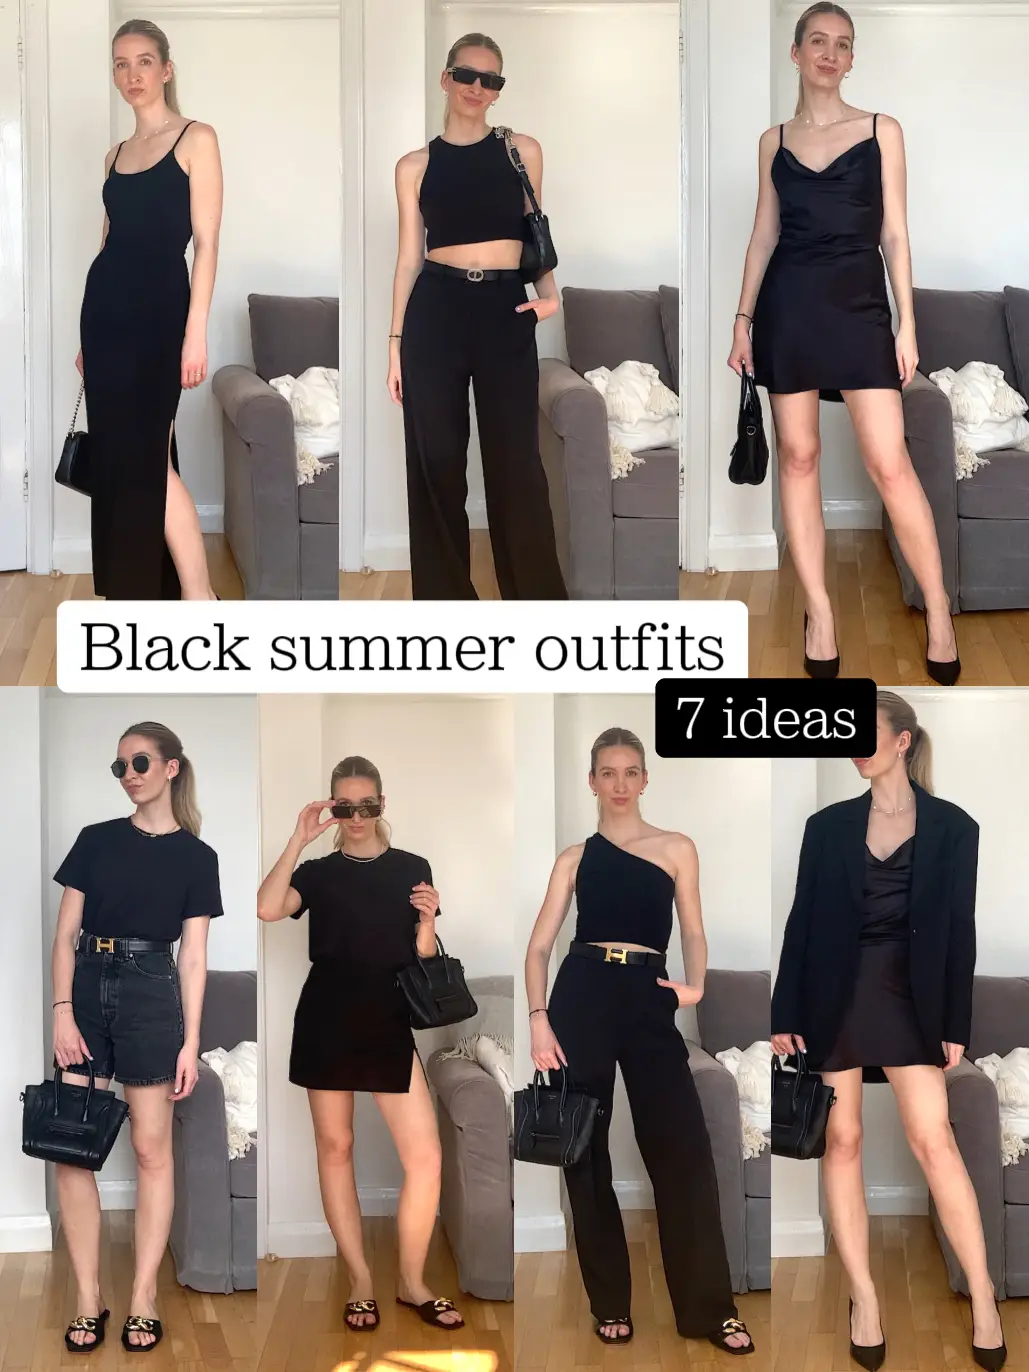 7 black summer outfit ideas, Gallery posted by Pauline Matter